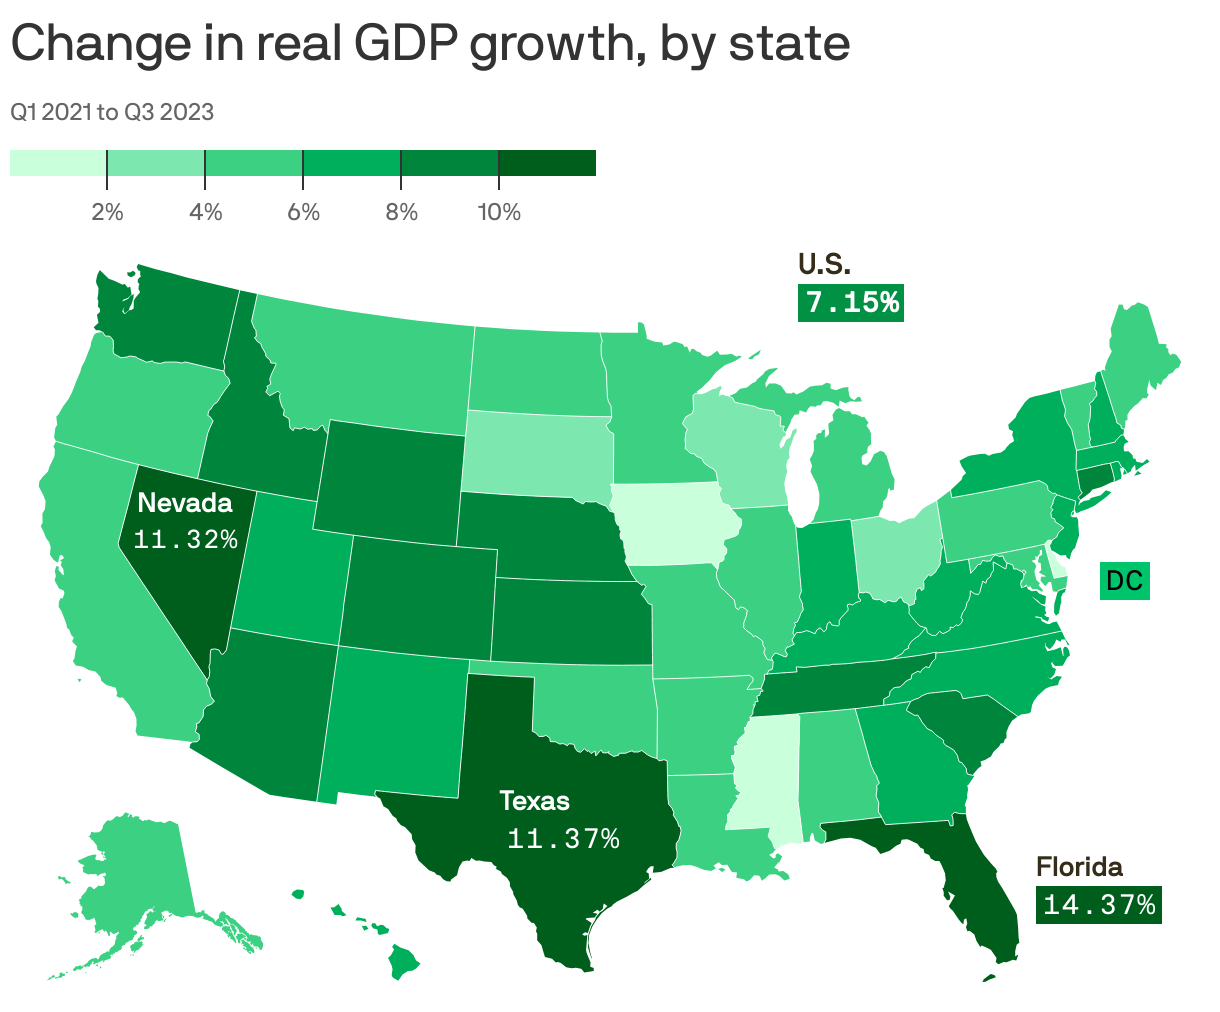 Change in real GDP growth, by state